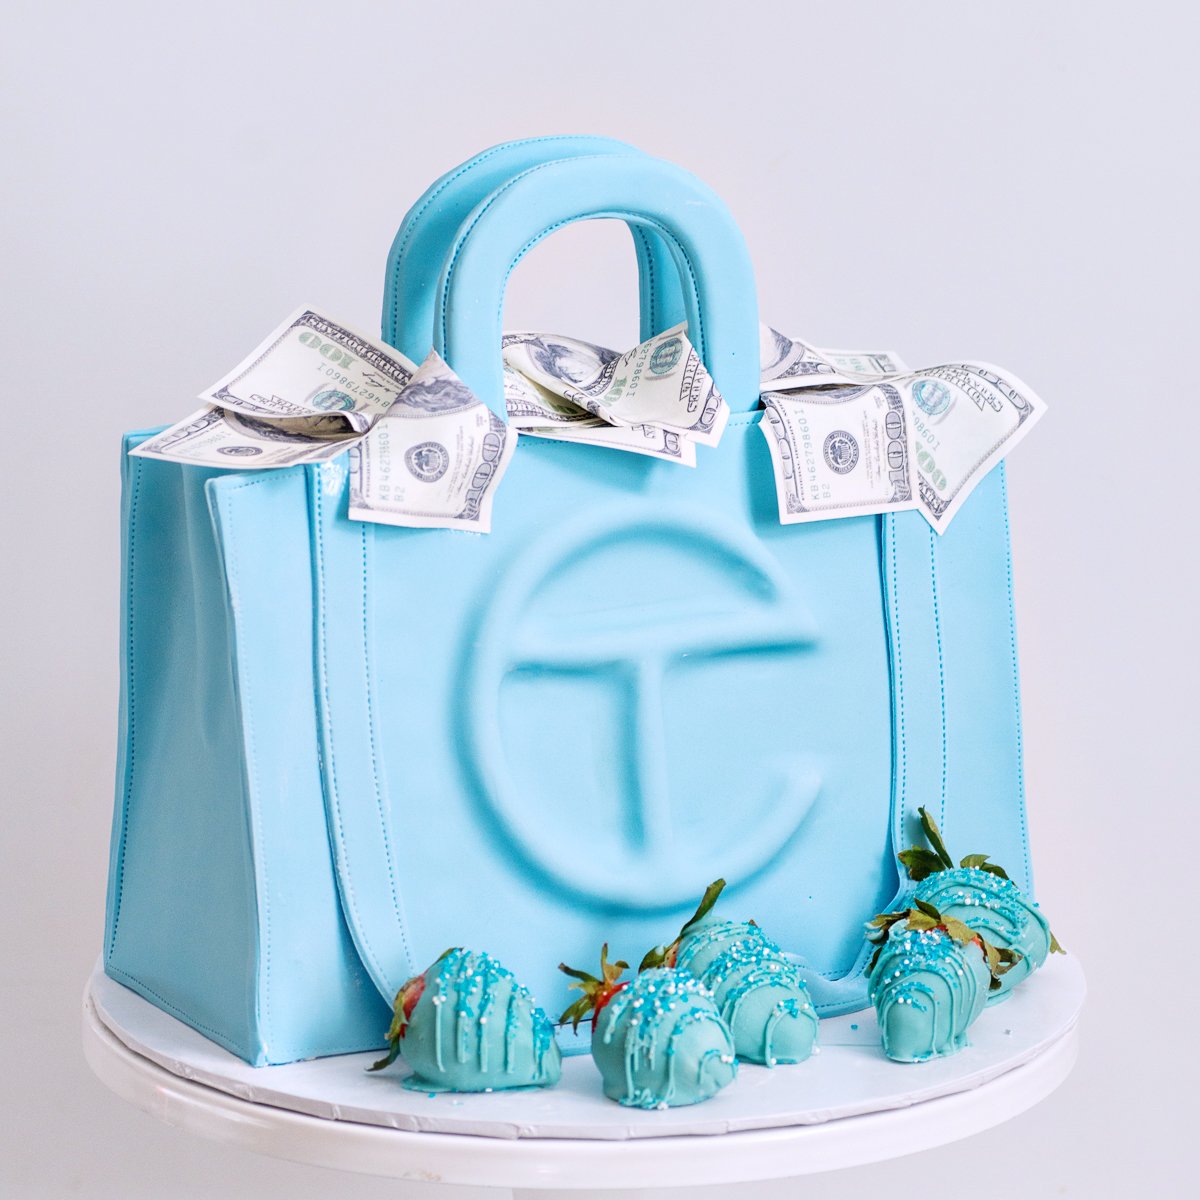 Chanel Party in Tiffany Blue and Black - Birthday Party Ideas for Kids